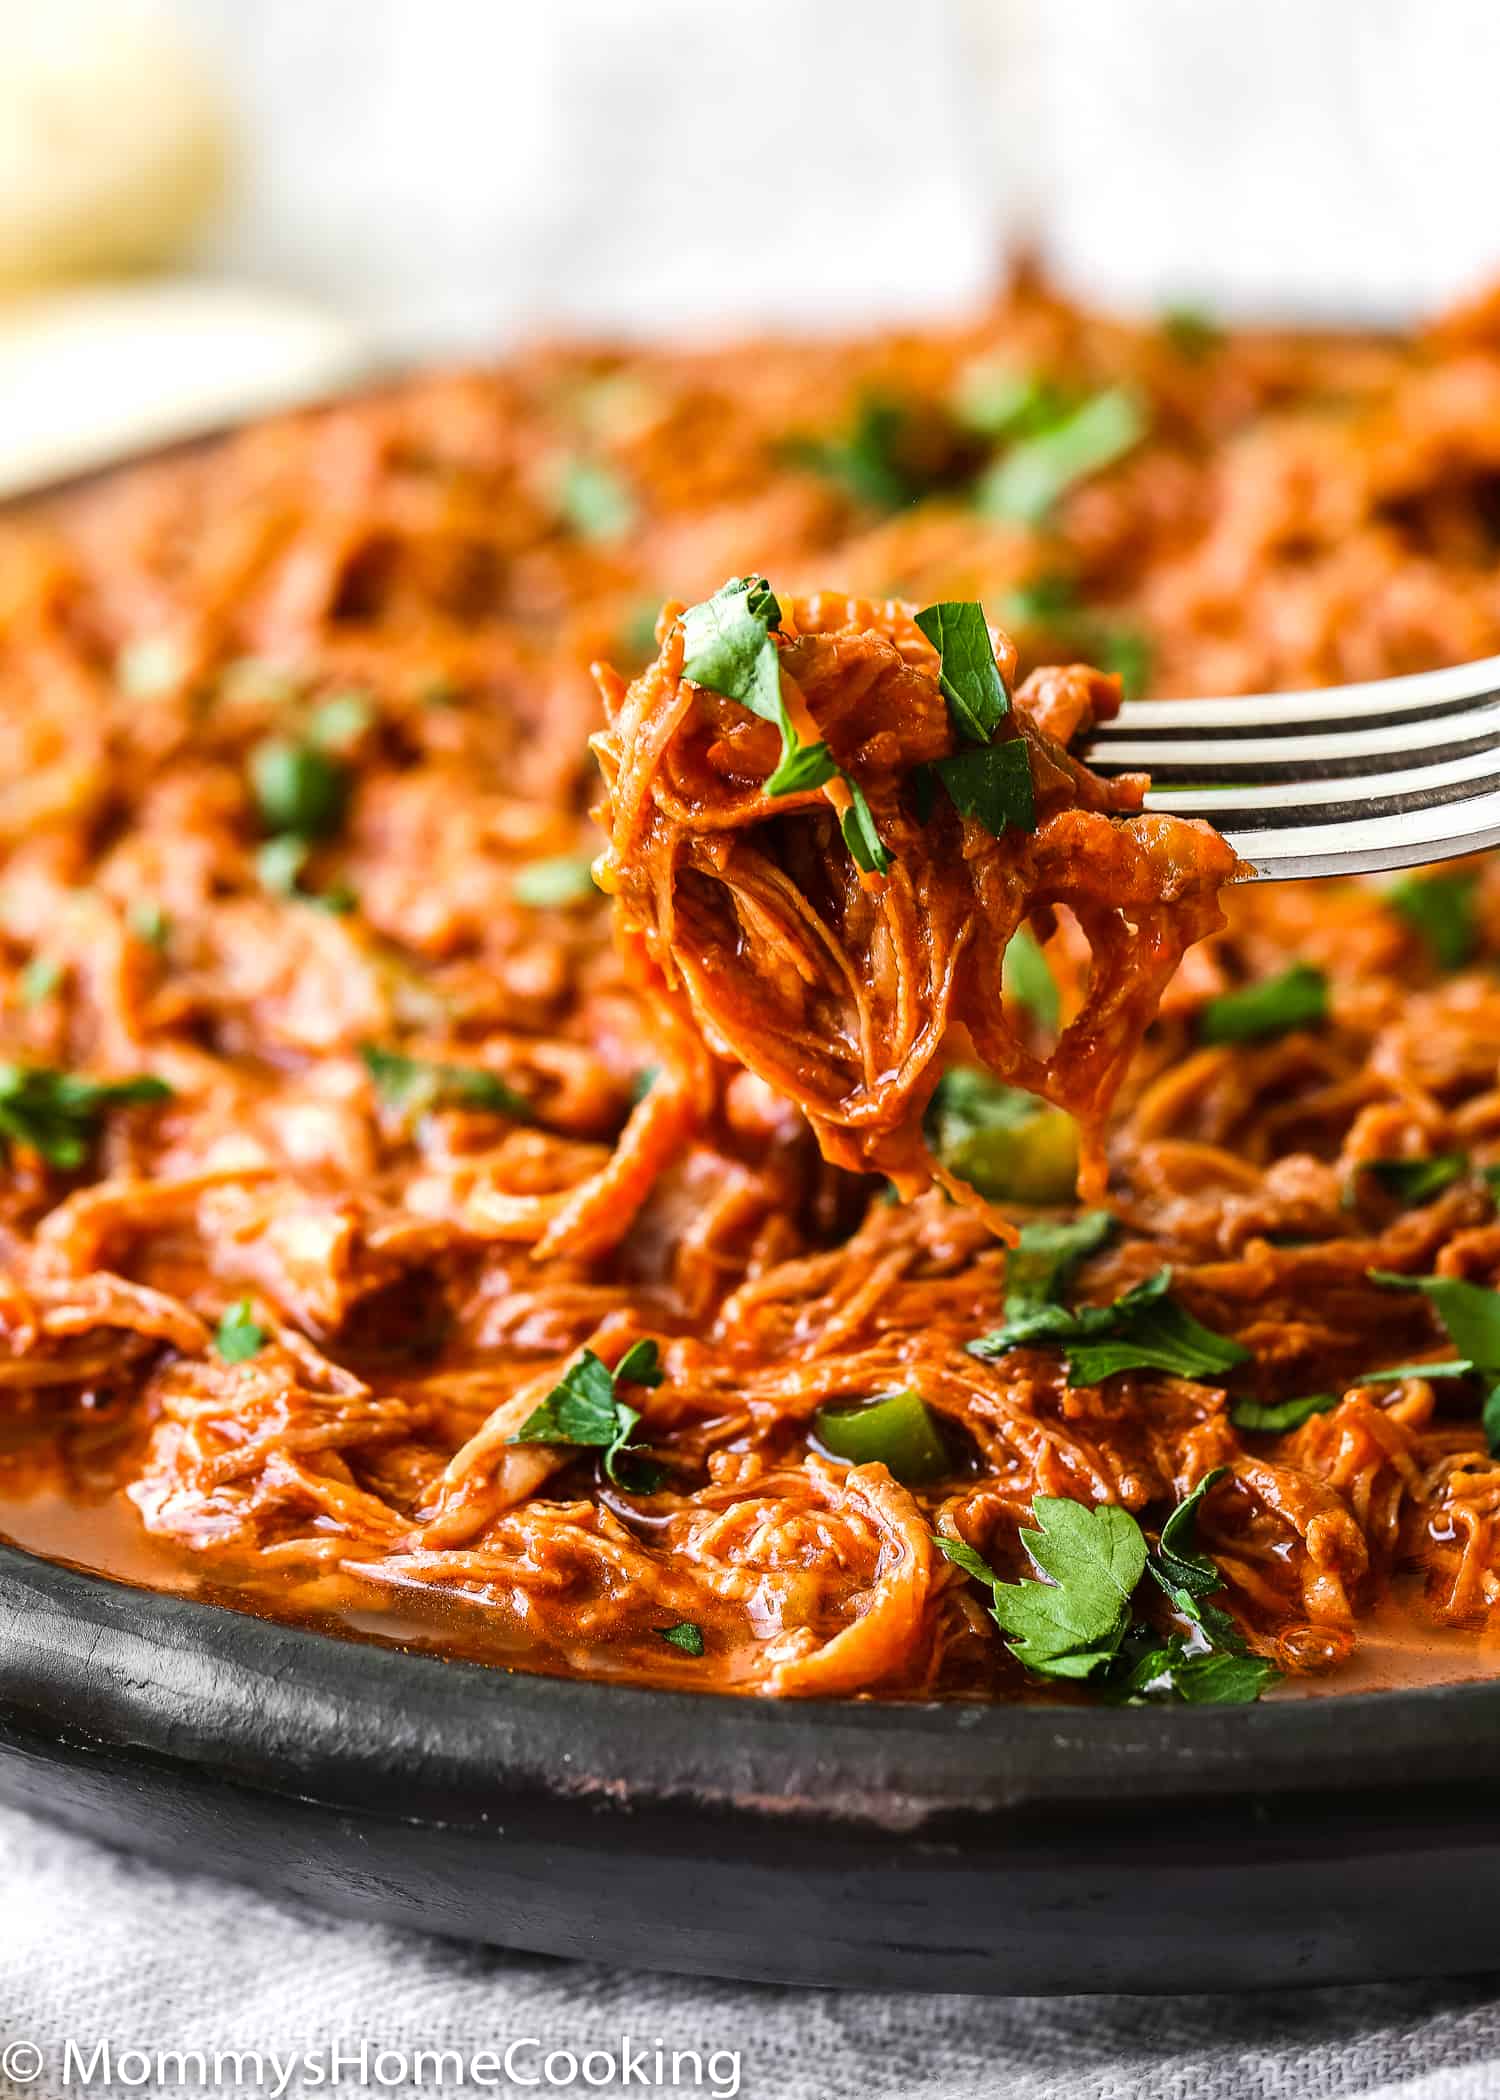 This Instant Pot Venezuelan Shredded Beef is beyond delicious! Made quick and easy in the Instant Pot, this shredded beef is fantastic for tacos, arepas, burritos, empanadas, quesadillas, sliders or just served on rice or mashed potatoes. https://mommyshomecooking.com